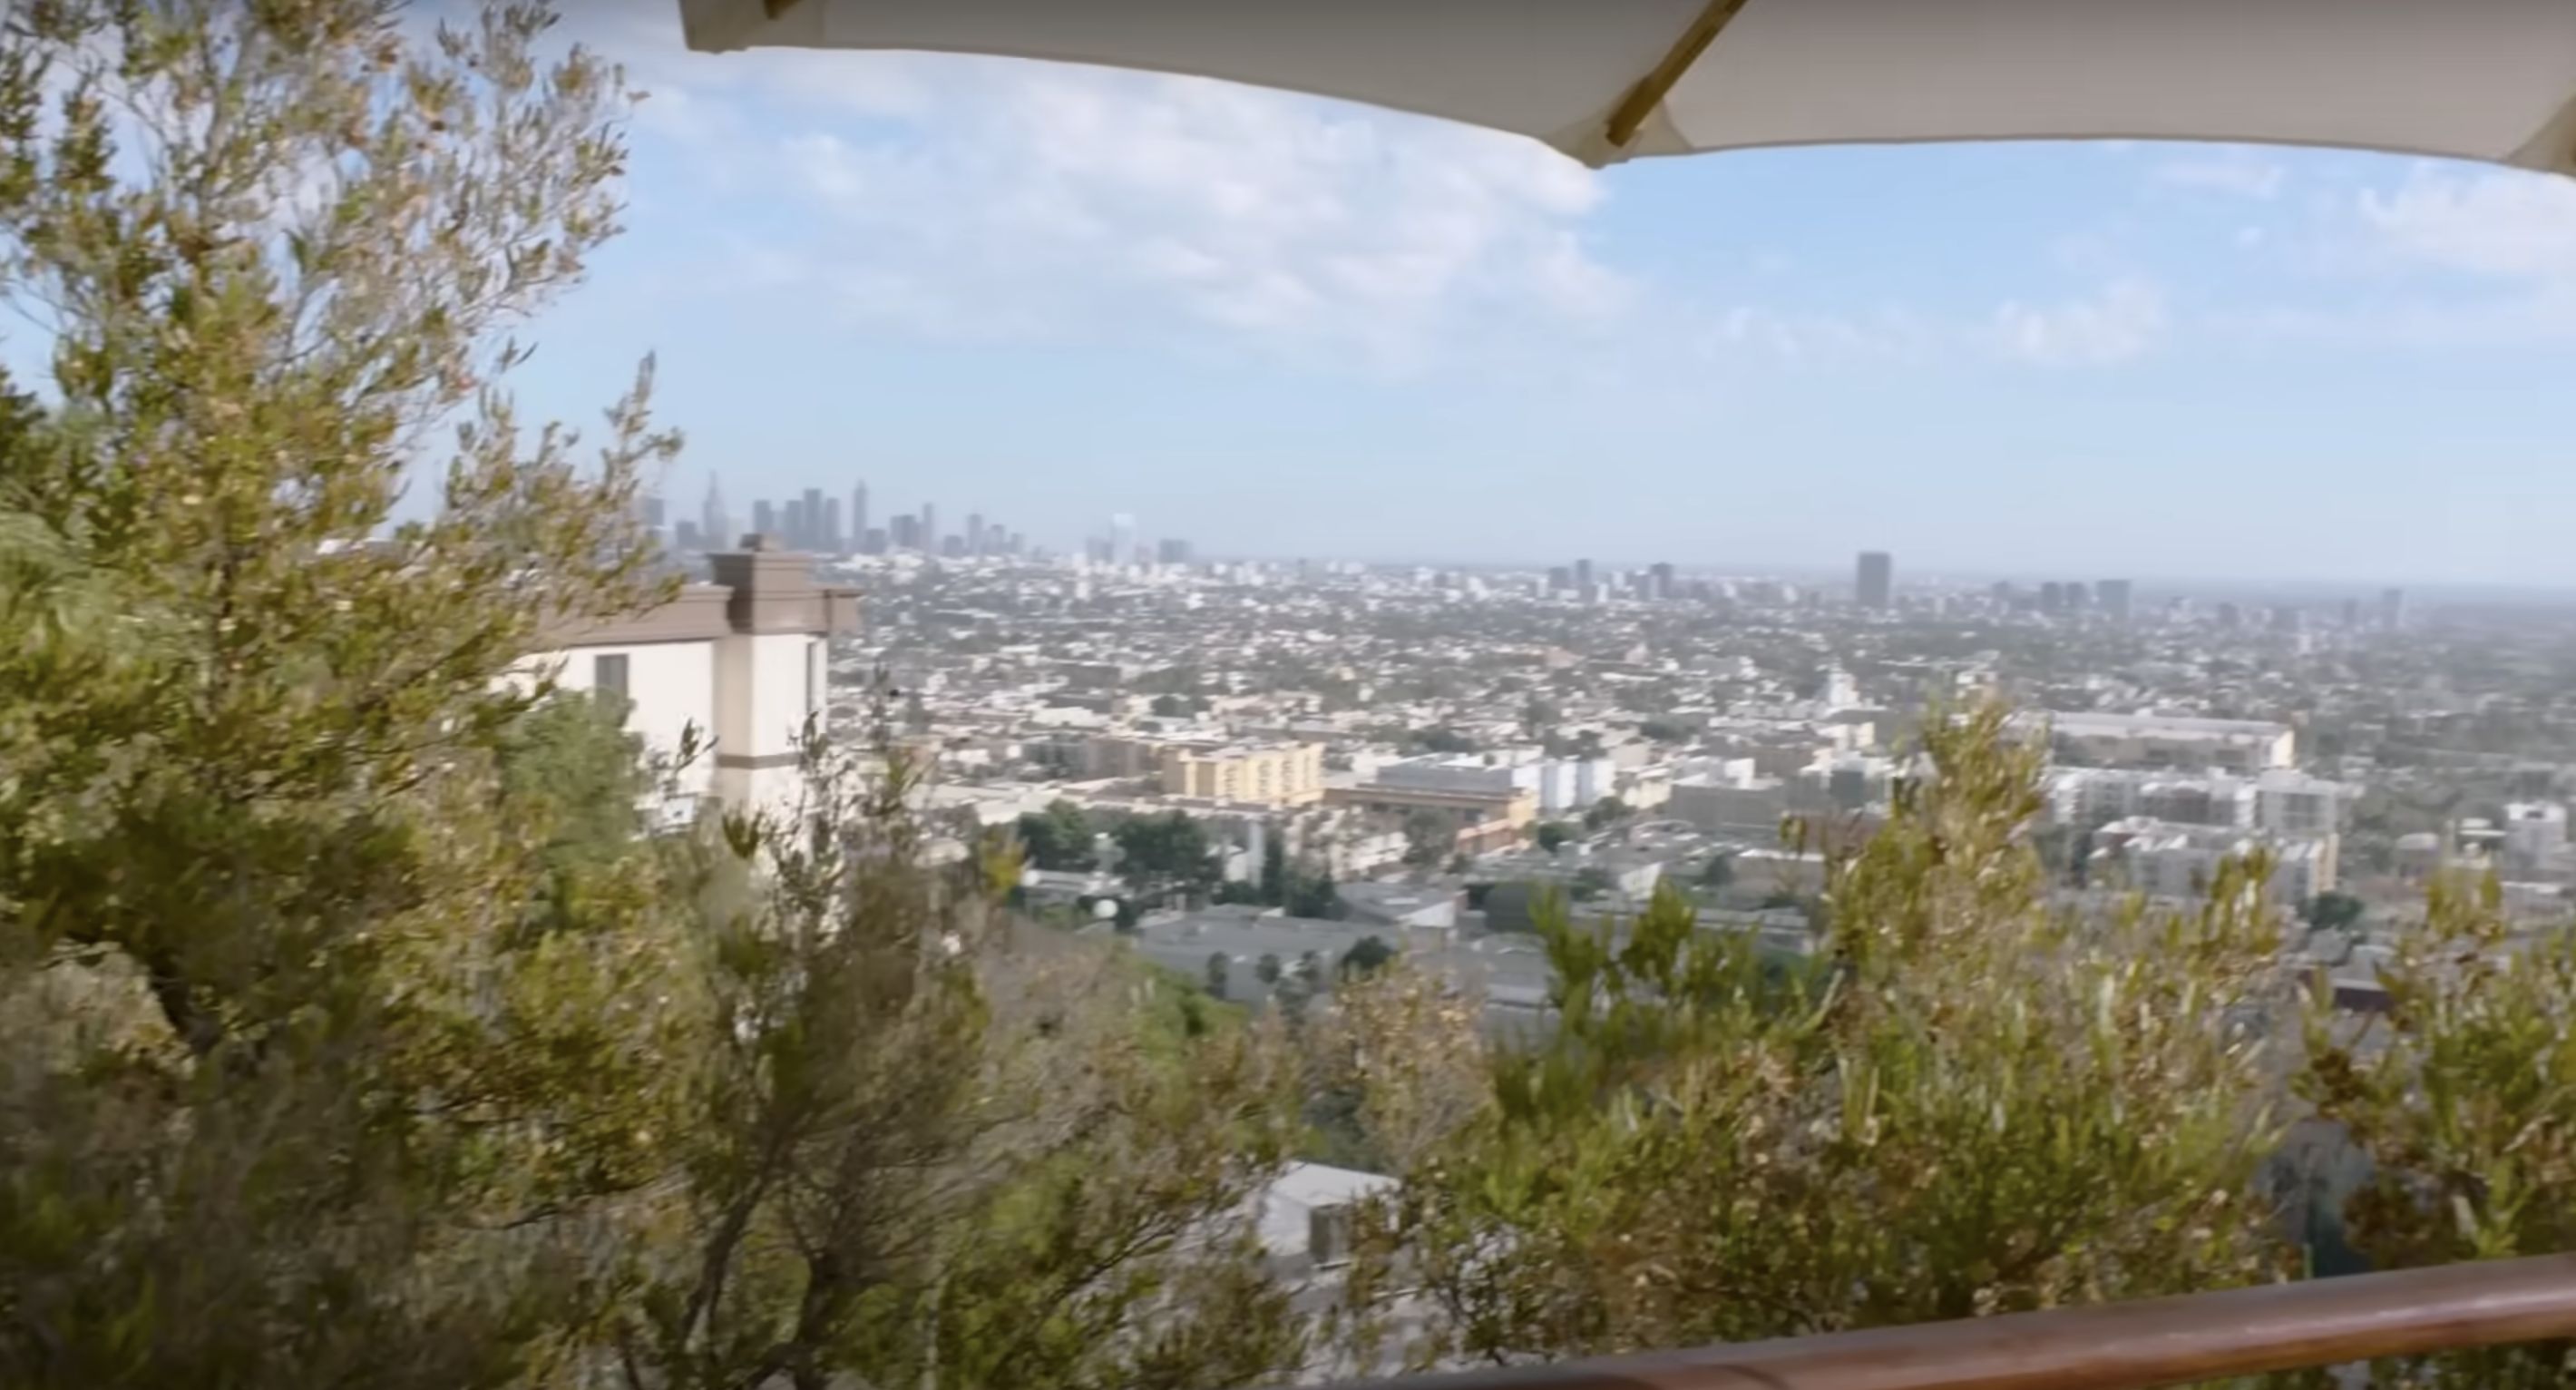 A view of Los Angeles from Zac Efron's Los Feliz residence, as seen in a video dated September 27, 2017 | Source: youtube.com/Vogue